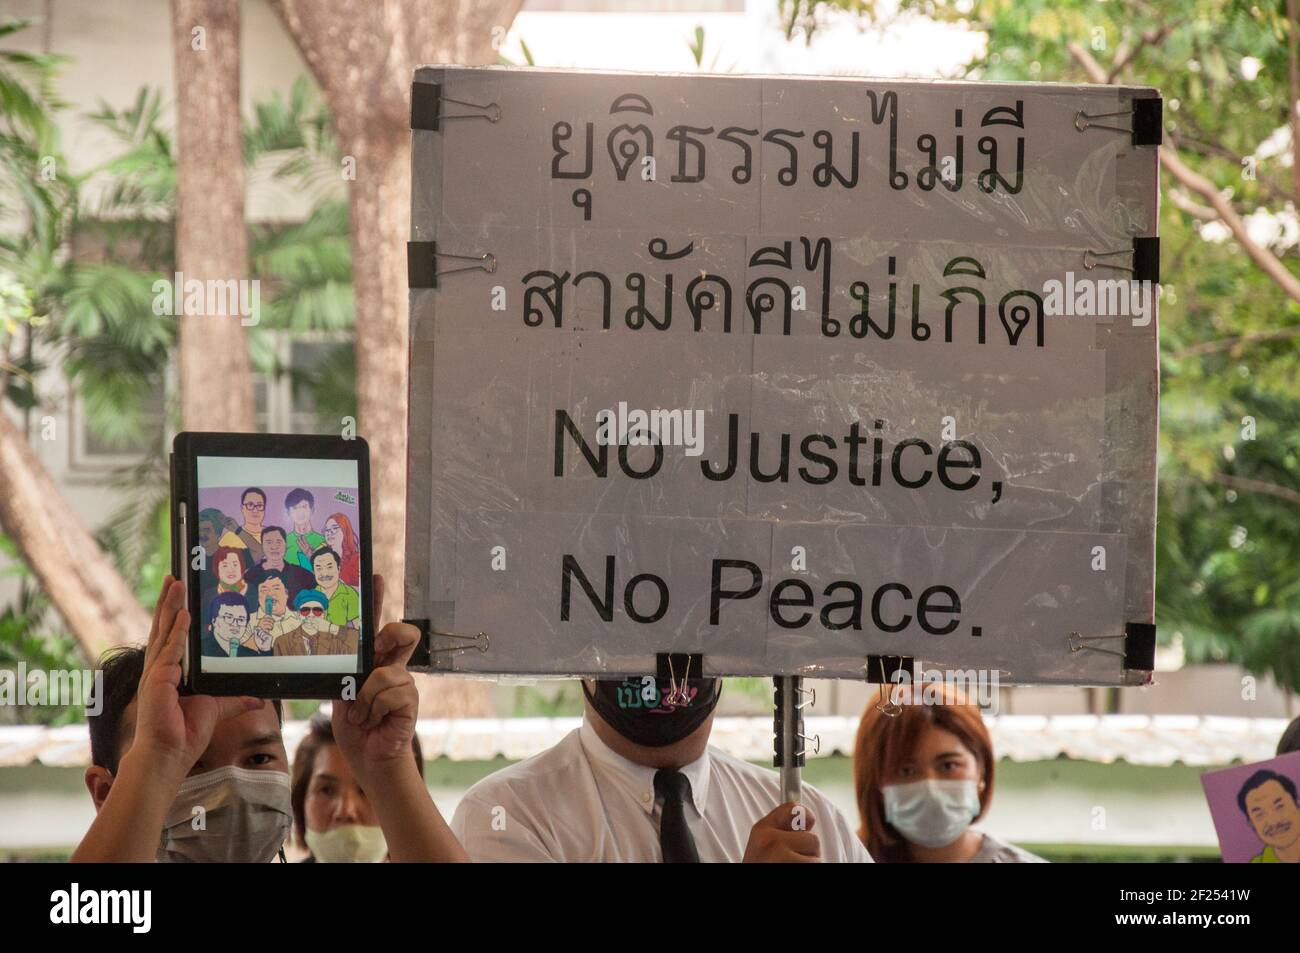 A protester holds a placard during the demonstration.Pro-democracy protesters held a protest at Chulalongkorn University in Bangkok demanding justice from the court and release of arrested Pro-democracy activists who were charged with lese majeste law (Article 112 of the Thai criminal code) (Photo by Peerapon Boonyakiat / SOPA Images/Sipa USA) Stock Photo